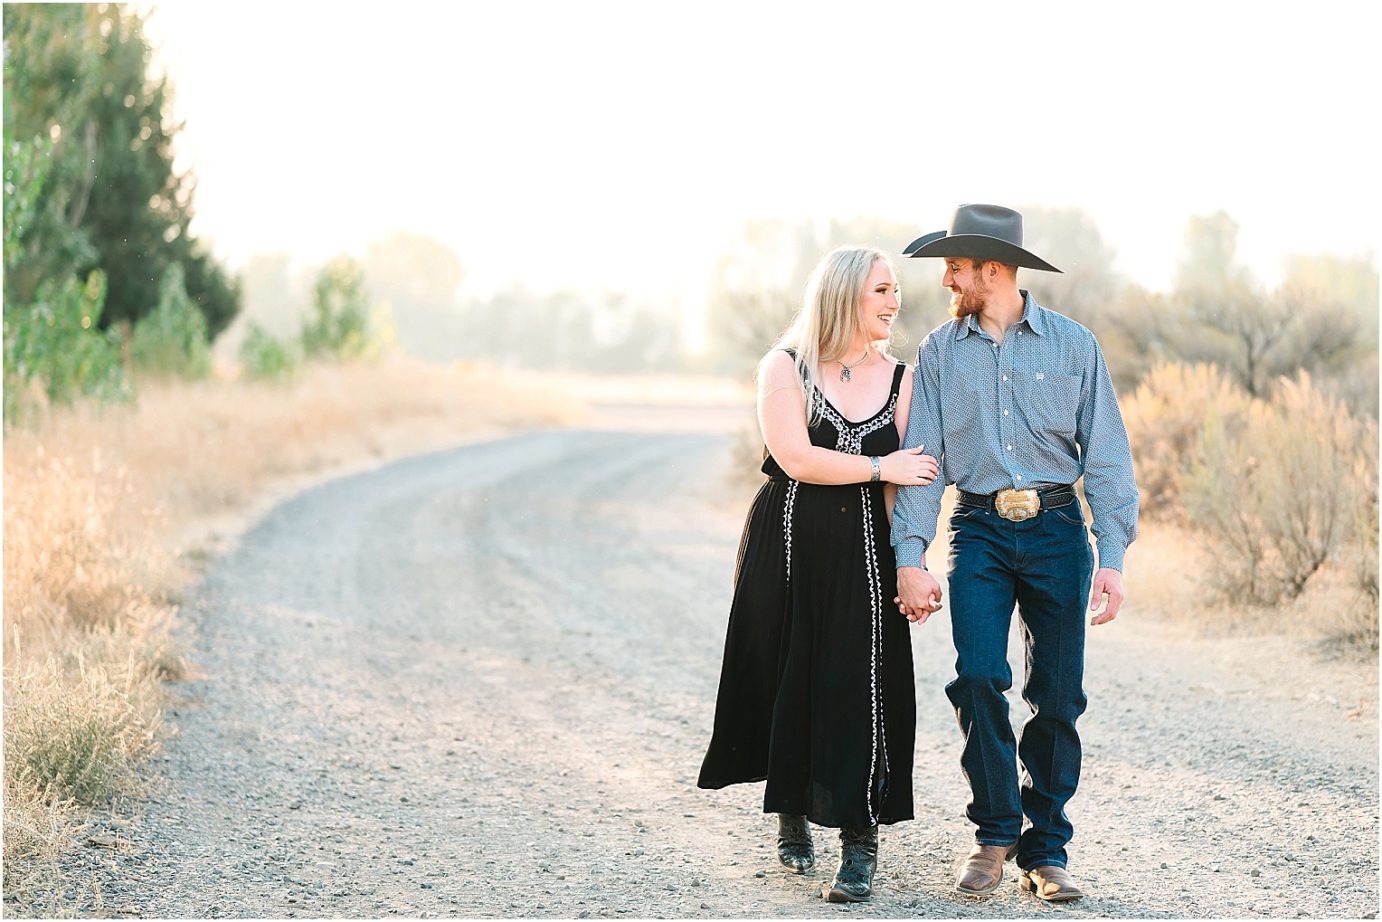 Engagement session in the desert Central WA Andrew and Shelby couple walking wearing western attire